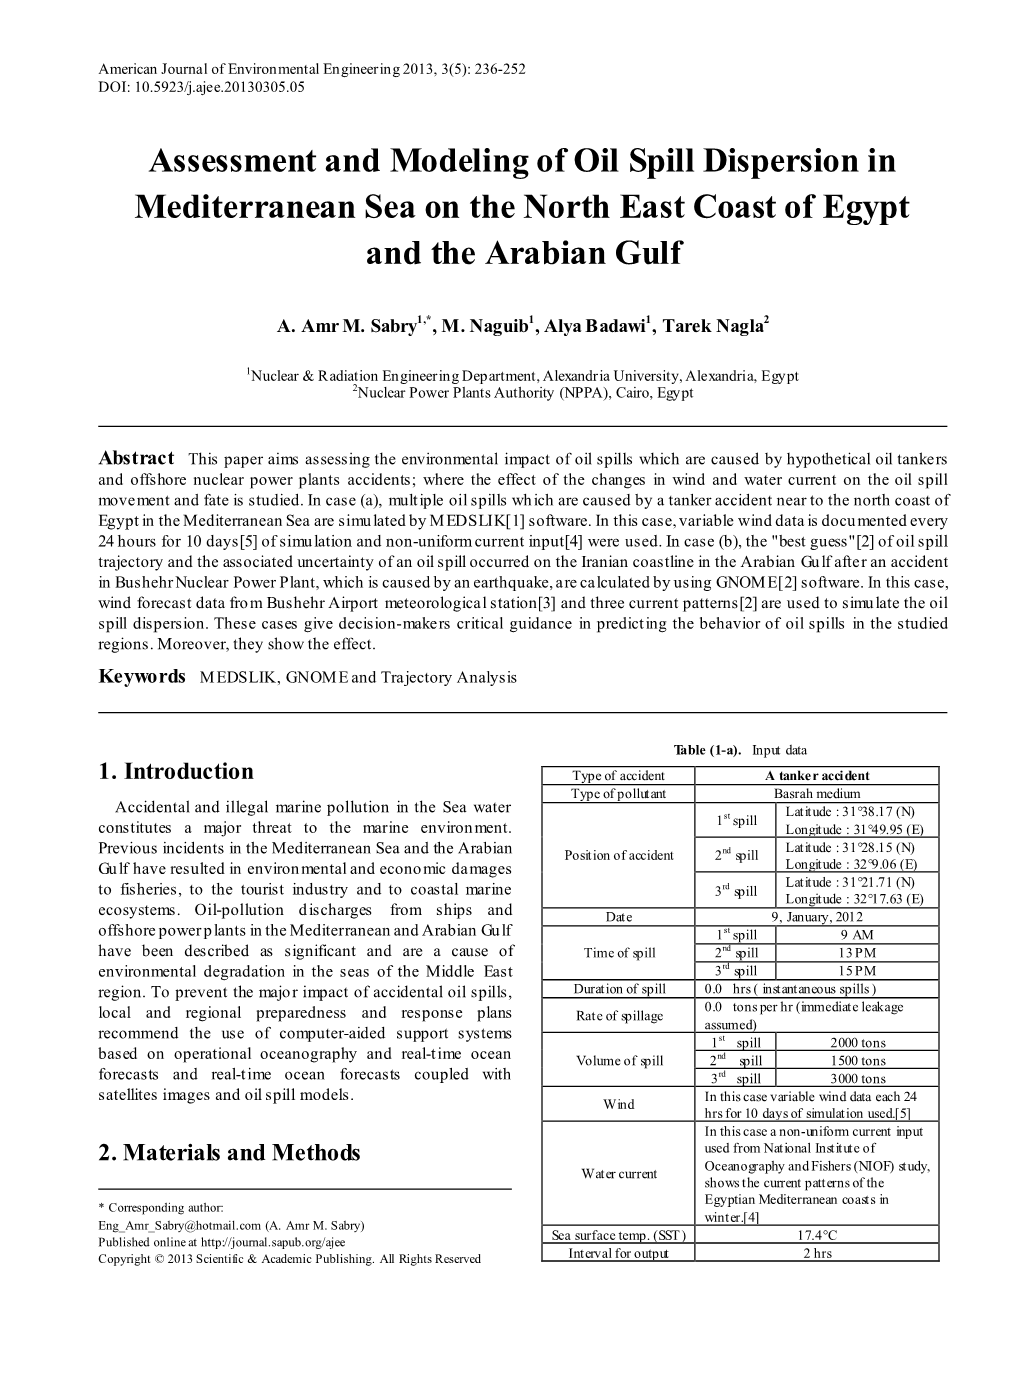 Assessment and Modeling of Oil Spill Dispersion in Mediterranean Sea on the North East Coast of Egypt and the Arabian Gulf